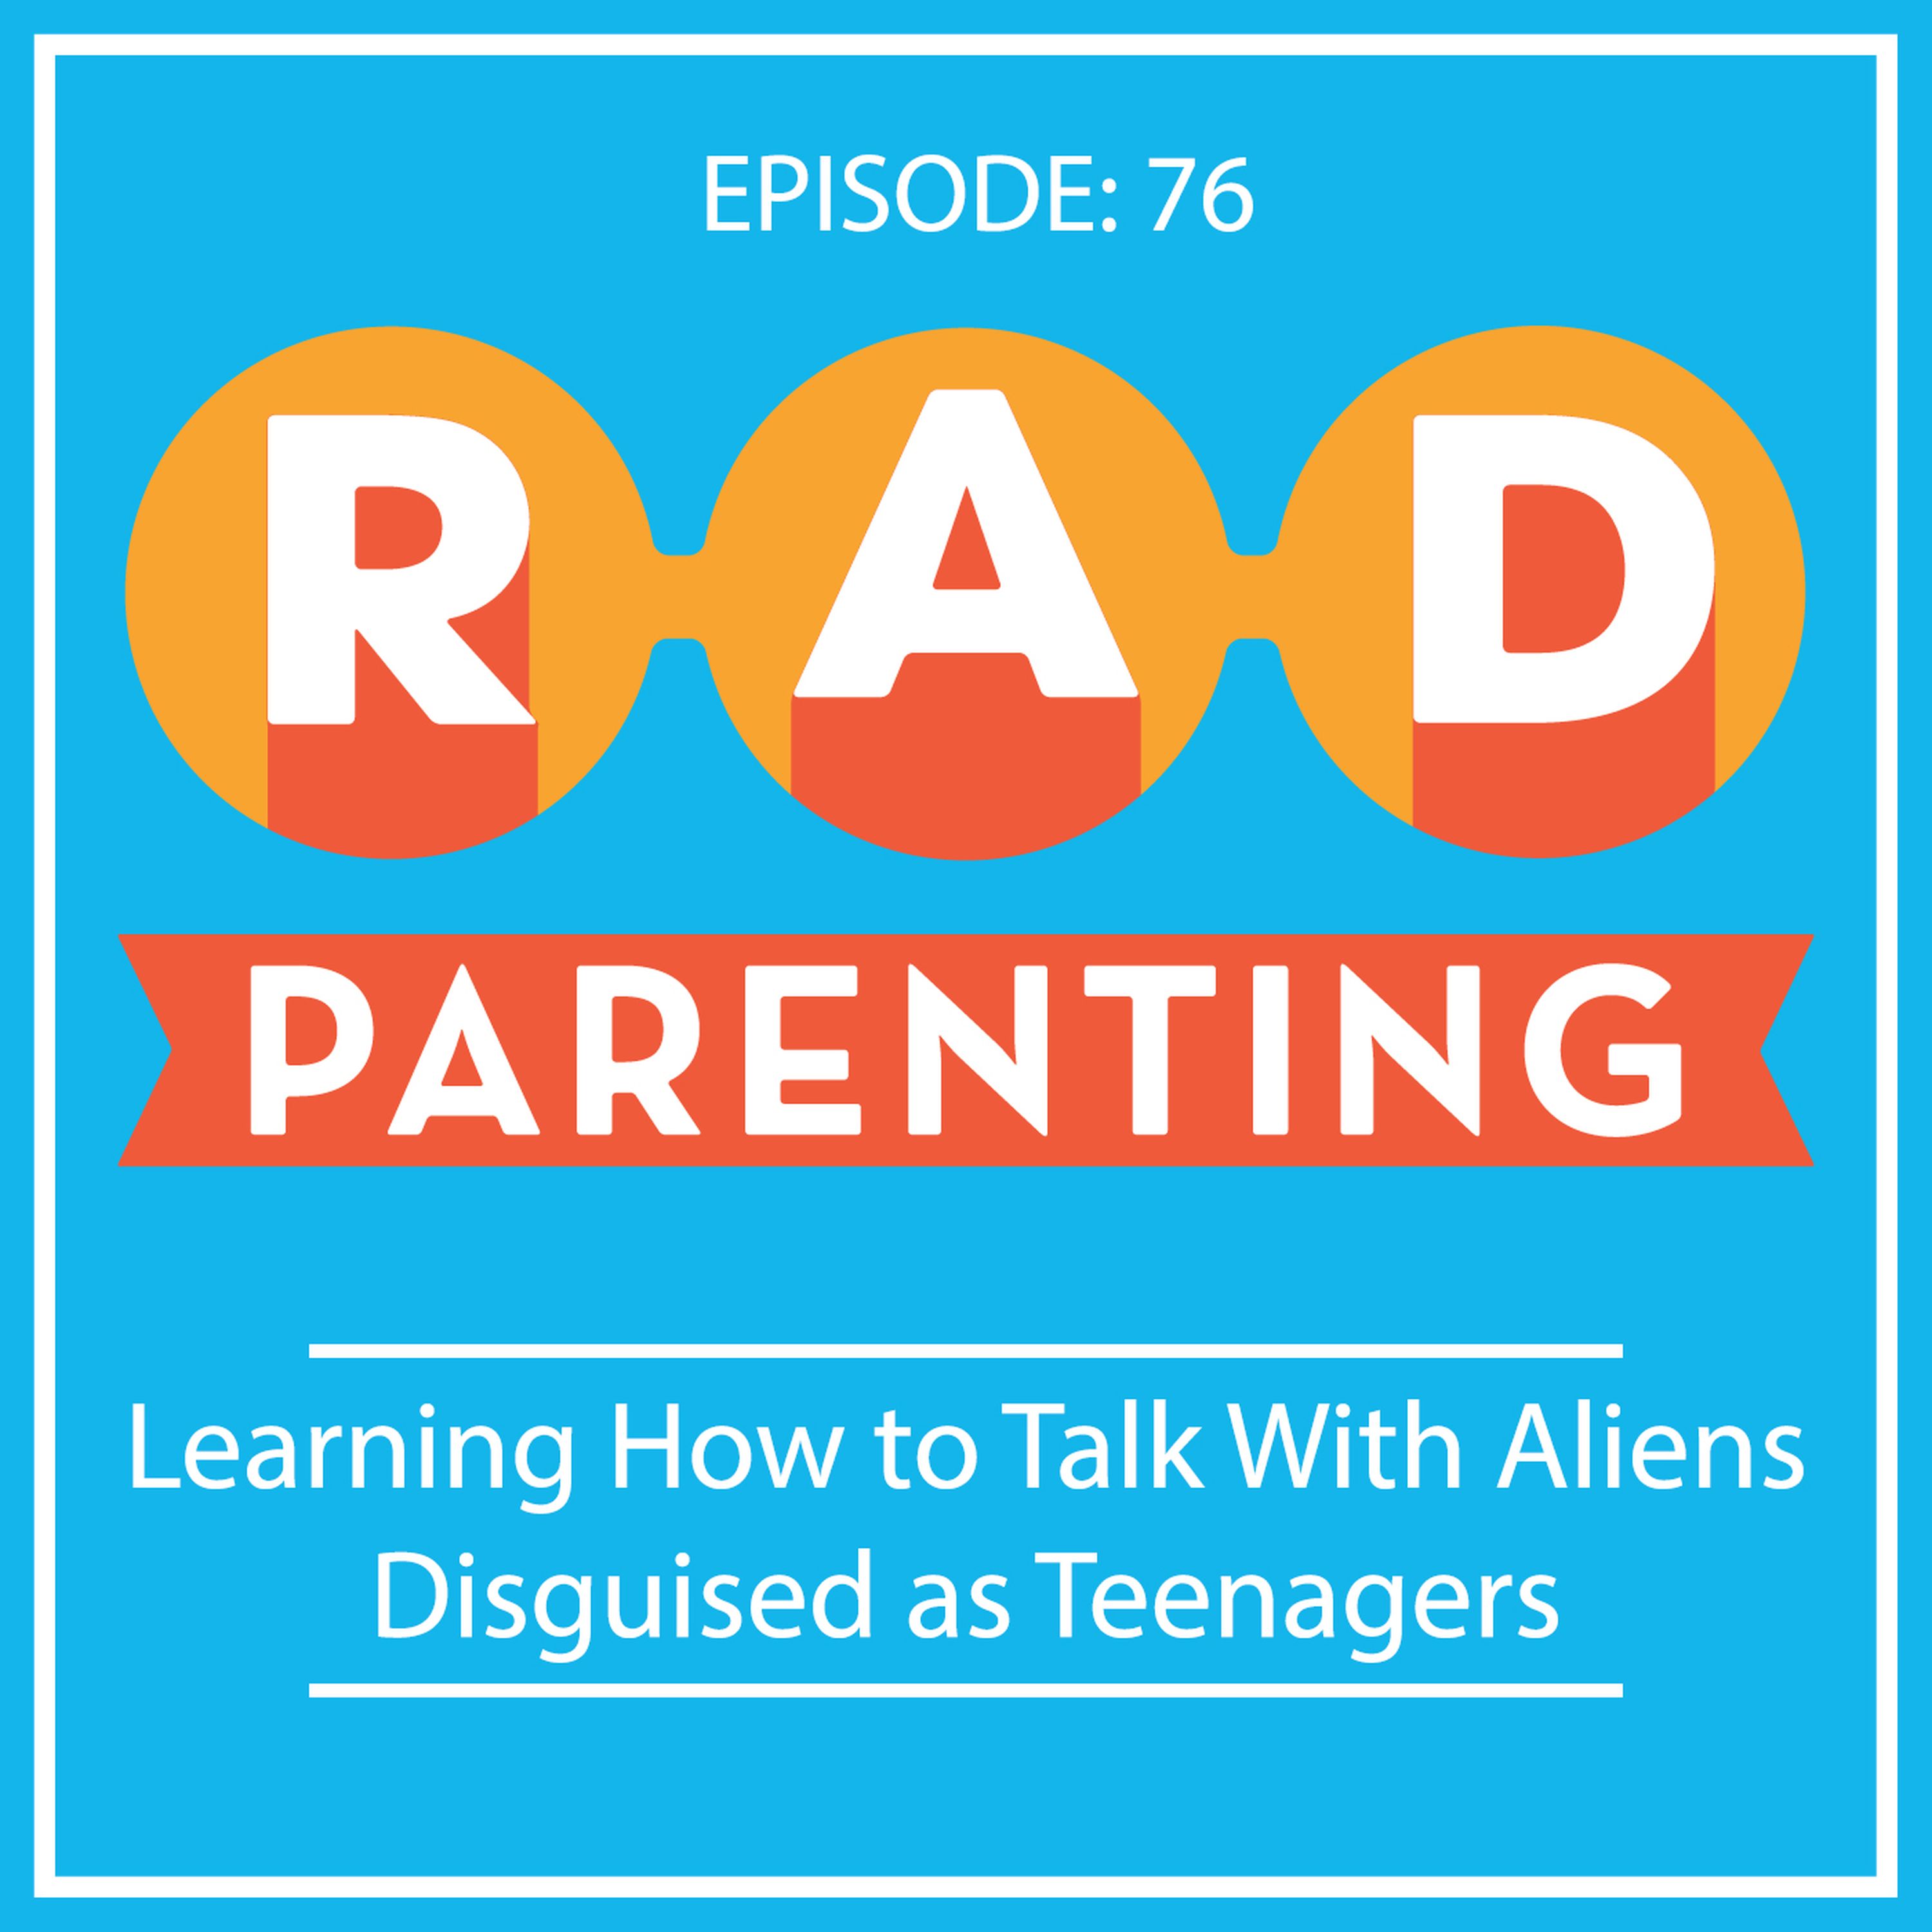 Learning How to Talk With Aliens Disguised as Teenagers